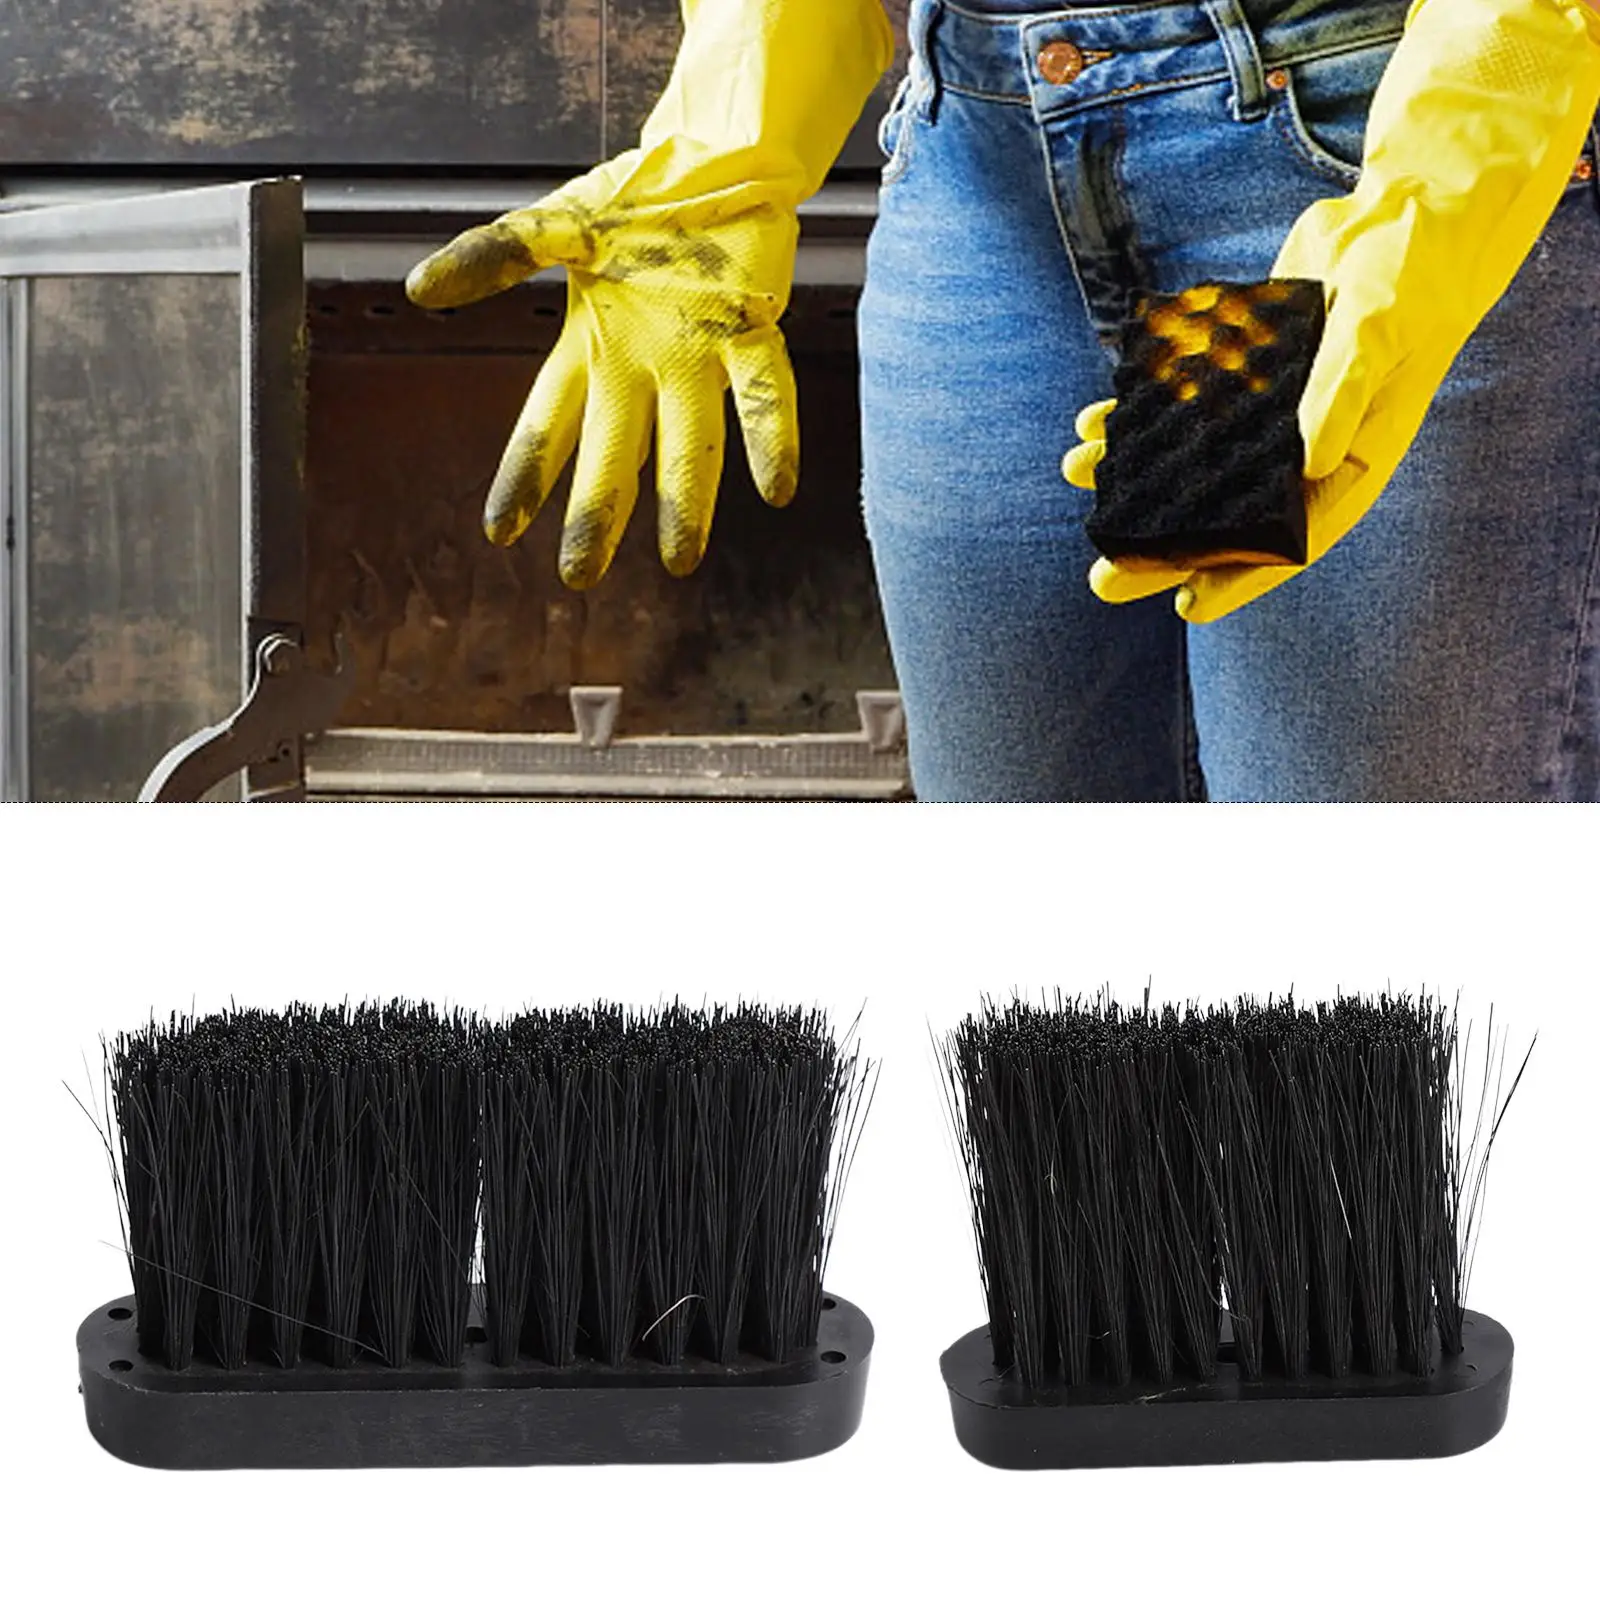 Fireplace Brush Cleaning Holder Fire Pits Hearth Fireside Brush for Fire Pits Fireplaces Hearths